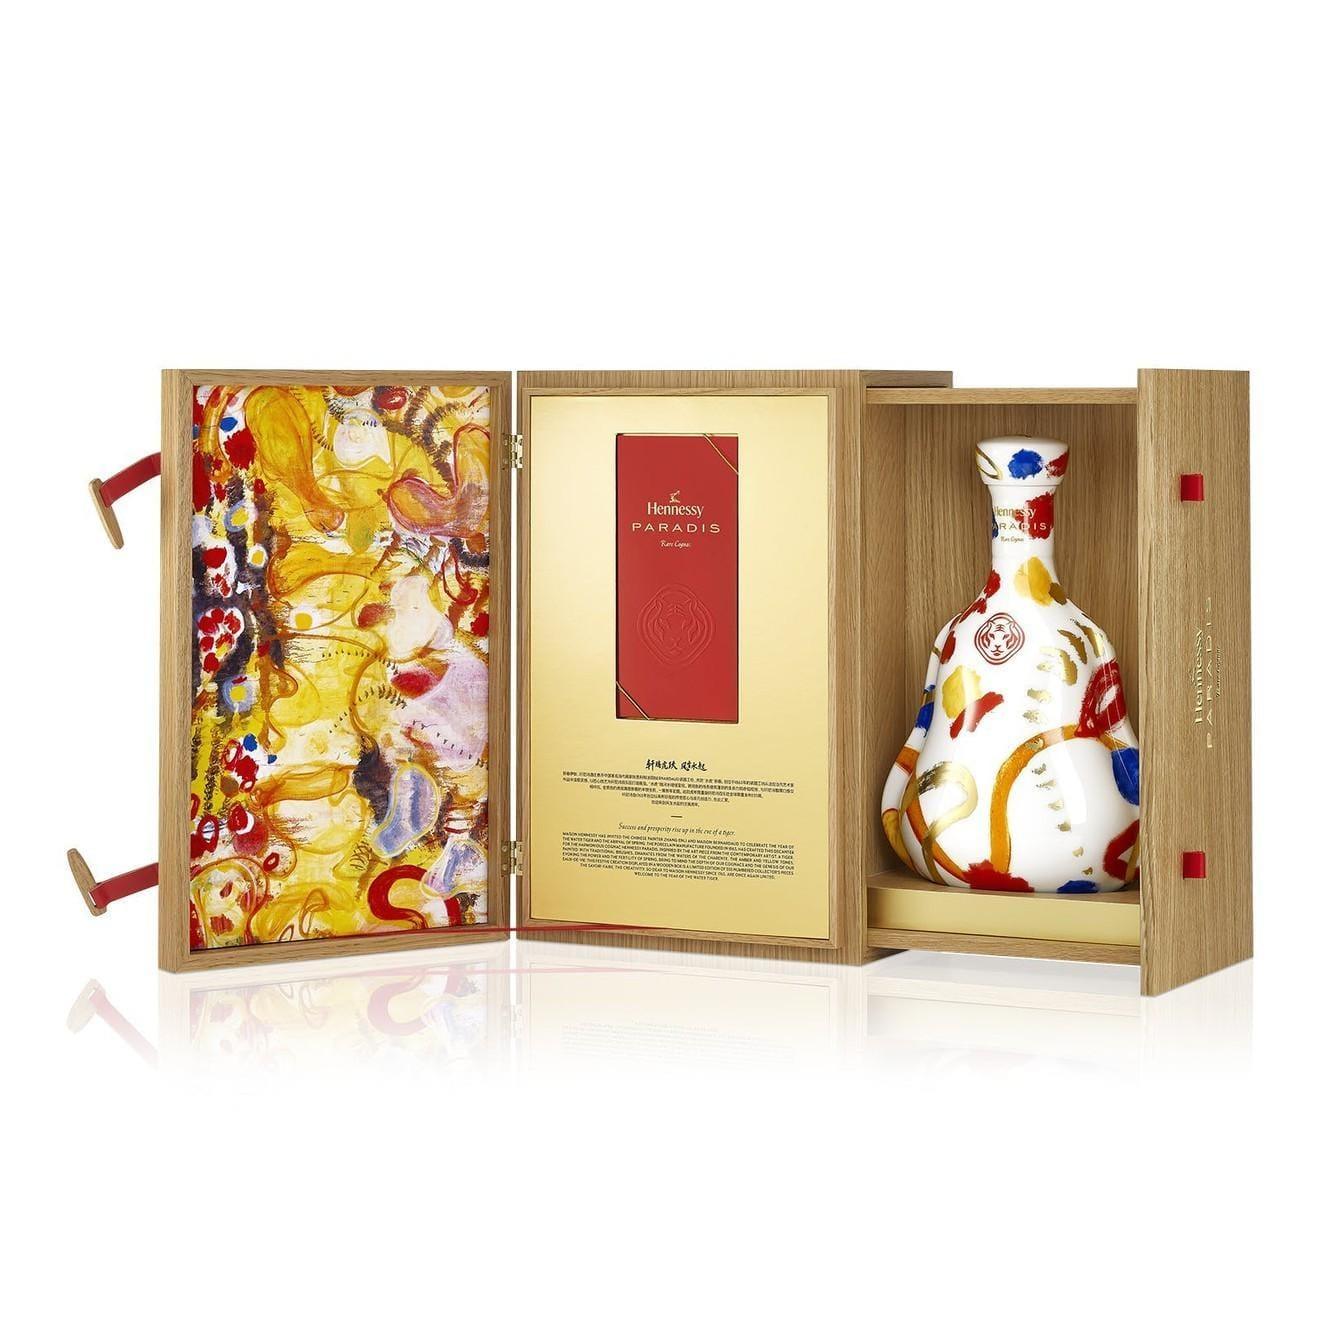 Hennessy Paradis x Zhang Enli 1 Liter Limited Edition Chinese New Year 2022 - Booze House